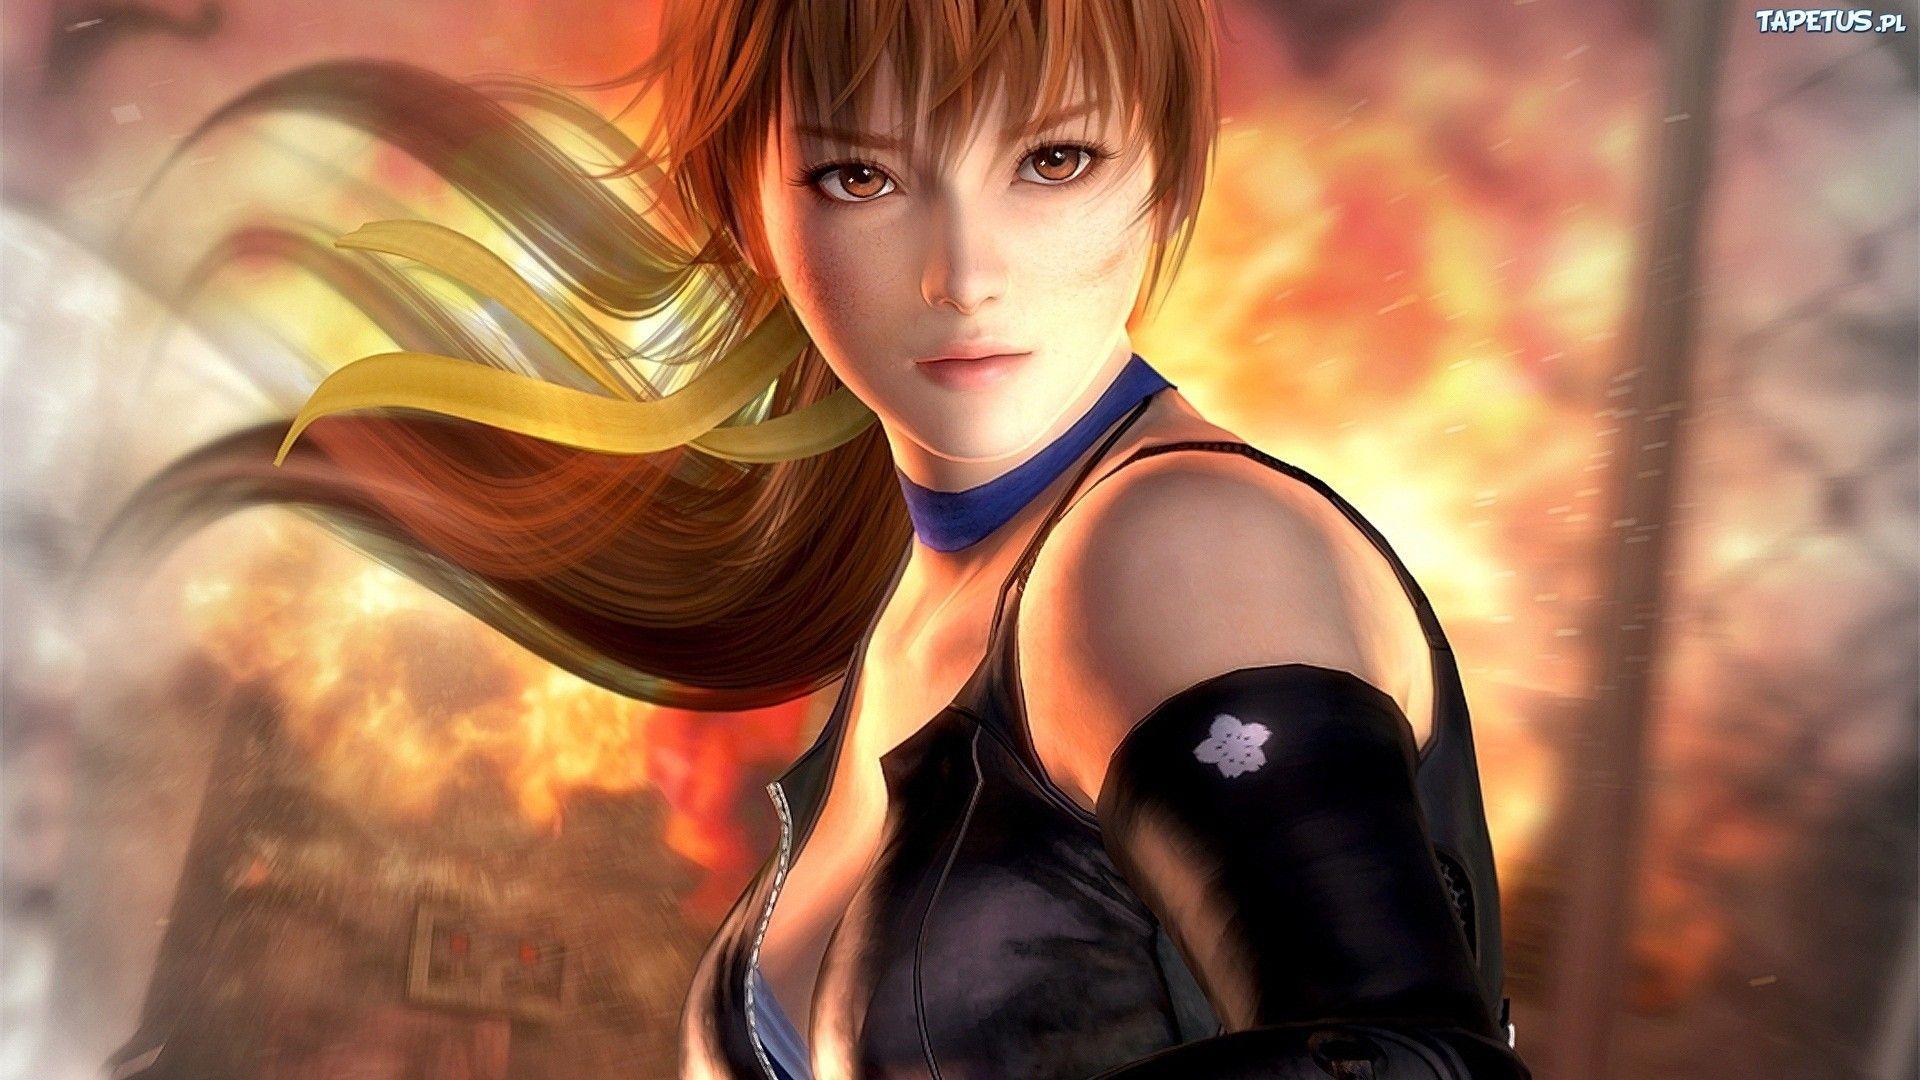 Dead Or Alive Wallpapers Top Free Dead Or Alive Backgrounds Wallpaperaccess